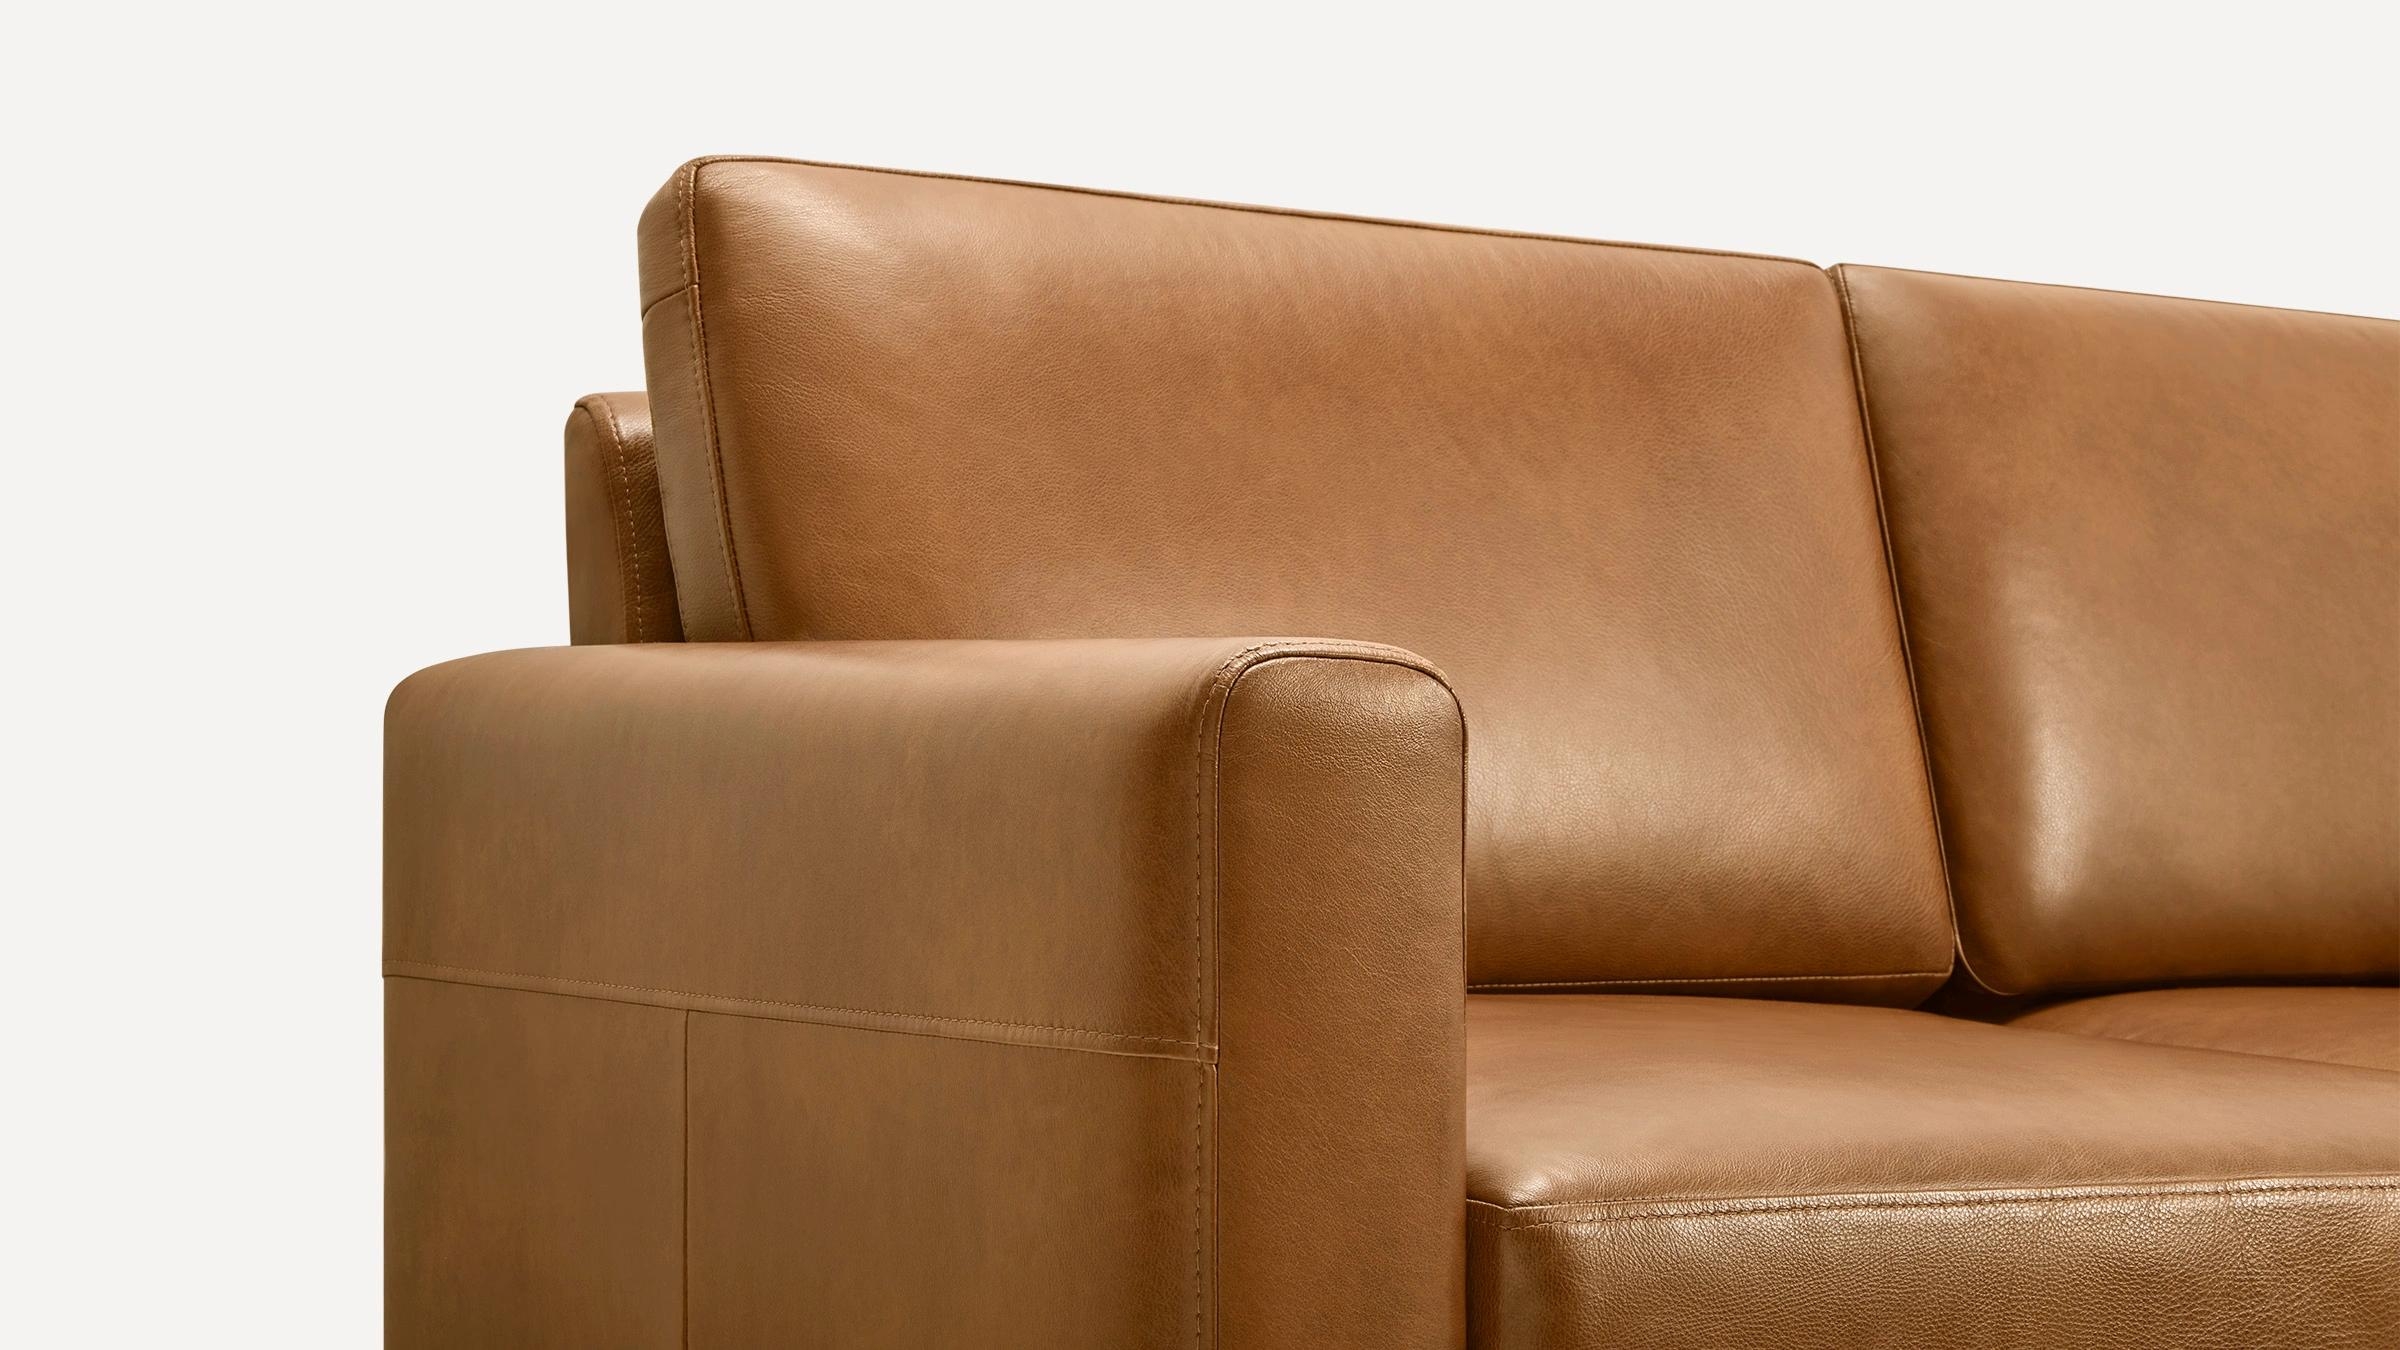 Nomad Leather Sectional in Camel, Black Metal Legs - Image 1